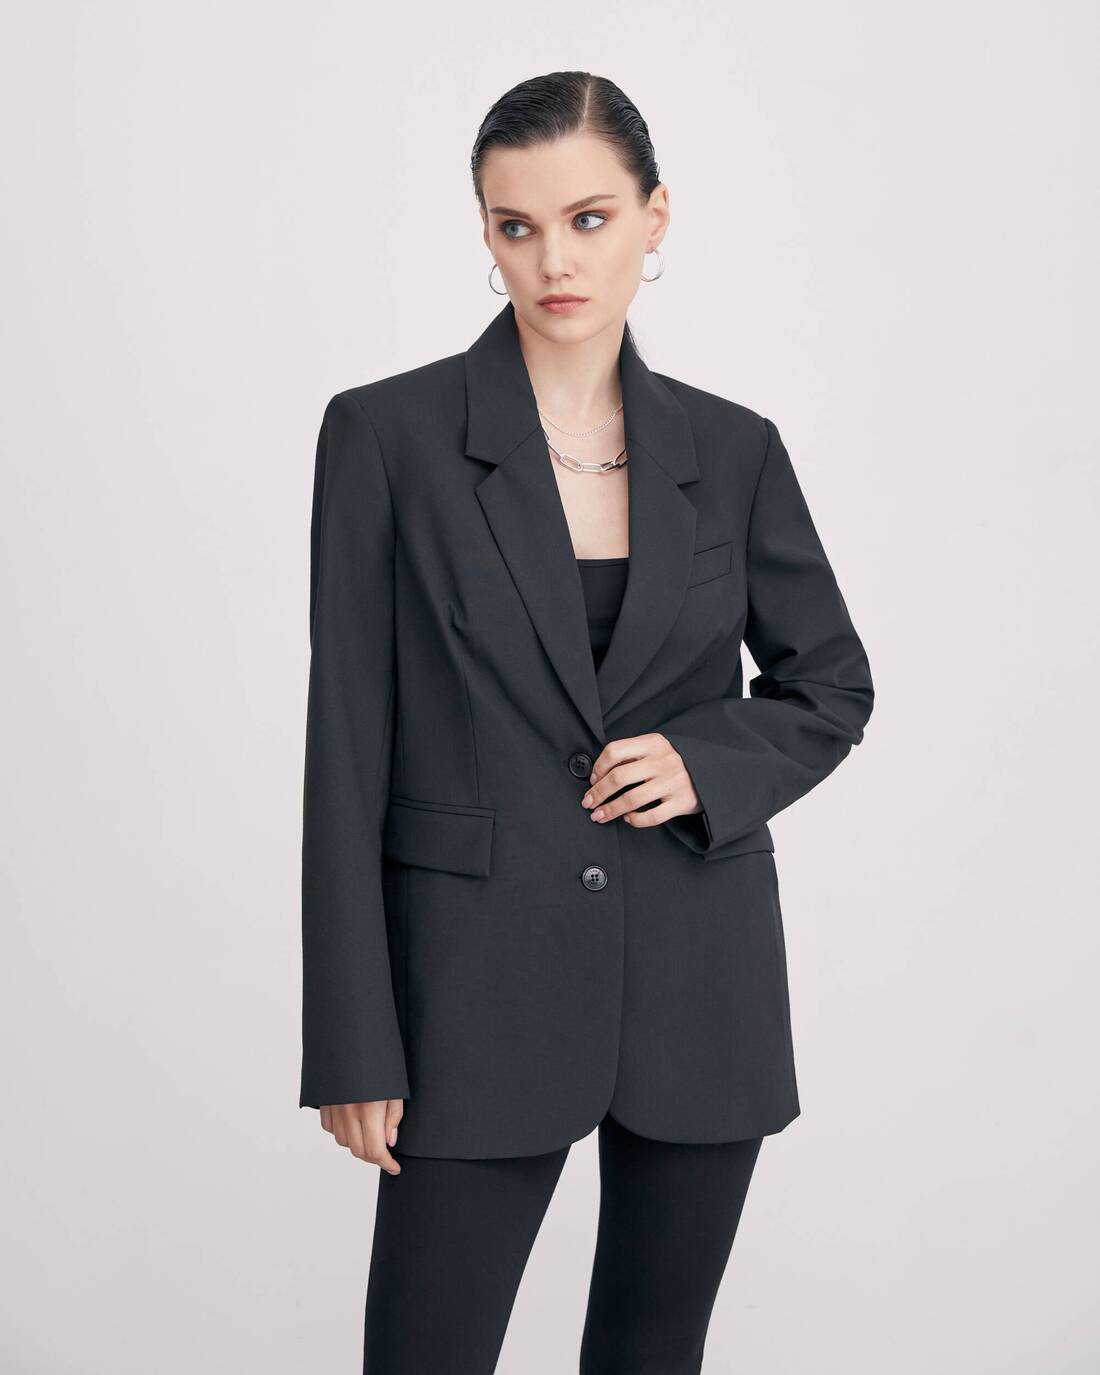 Semi-fitted jacket